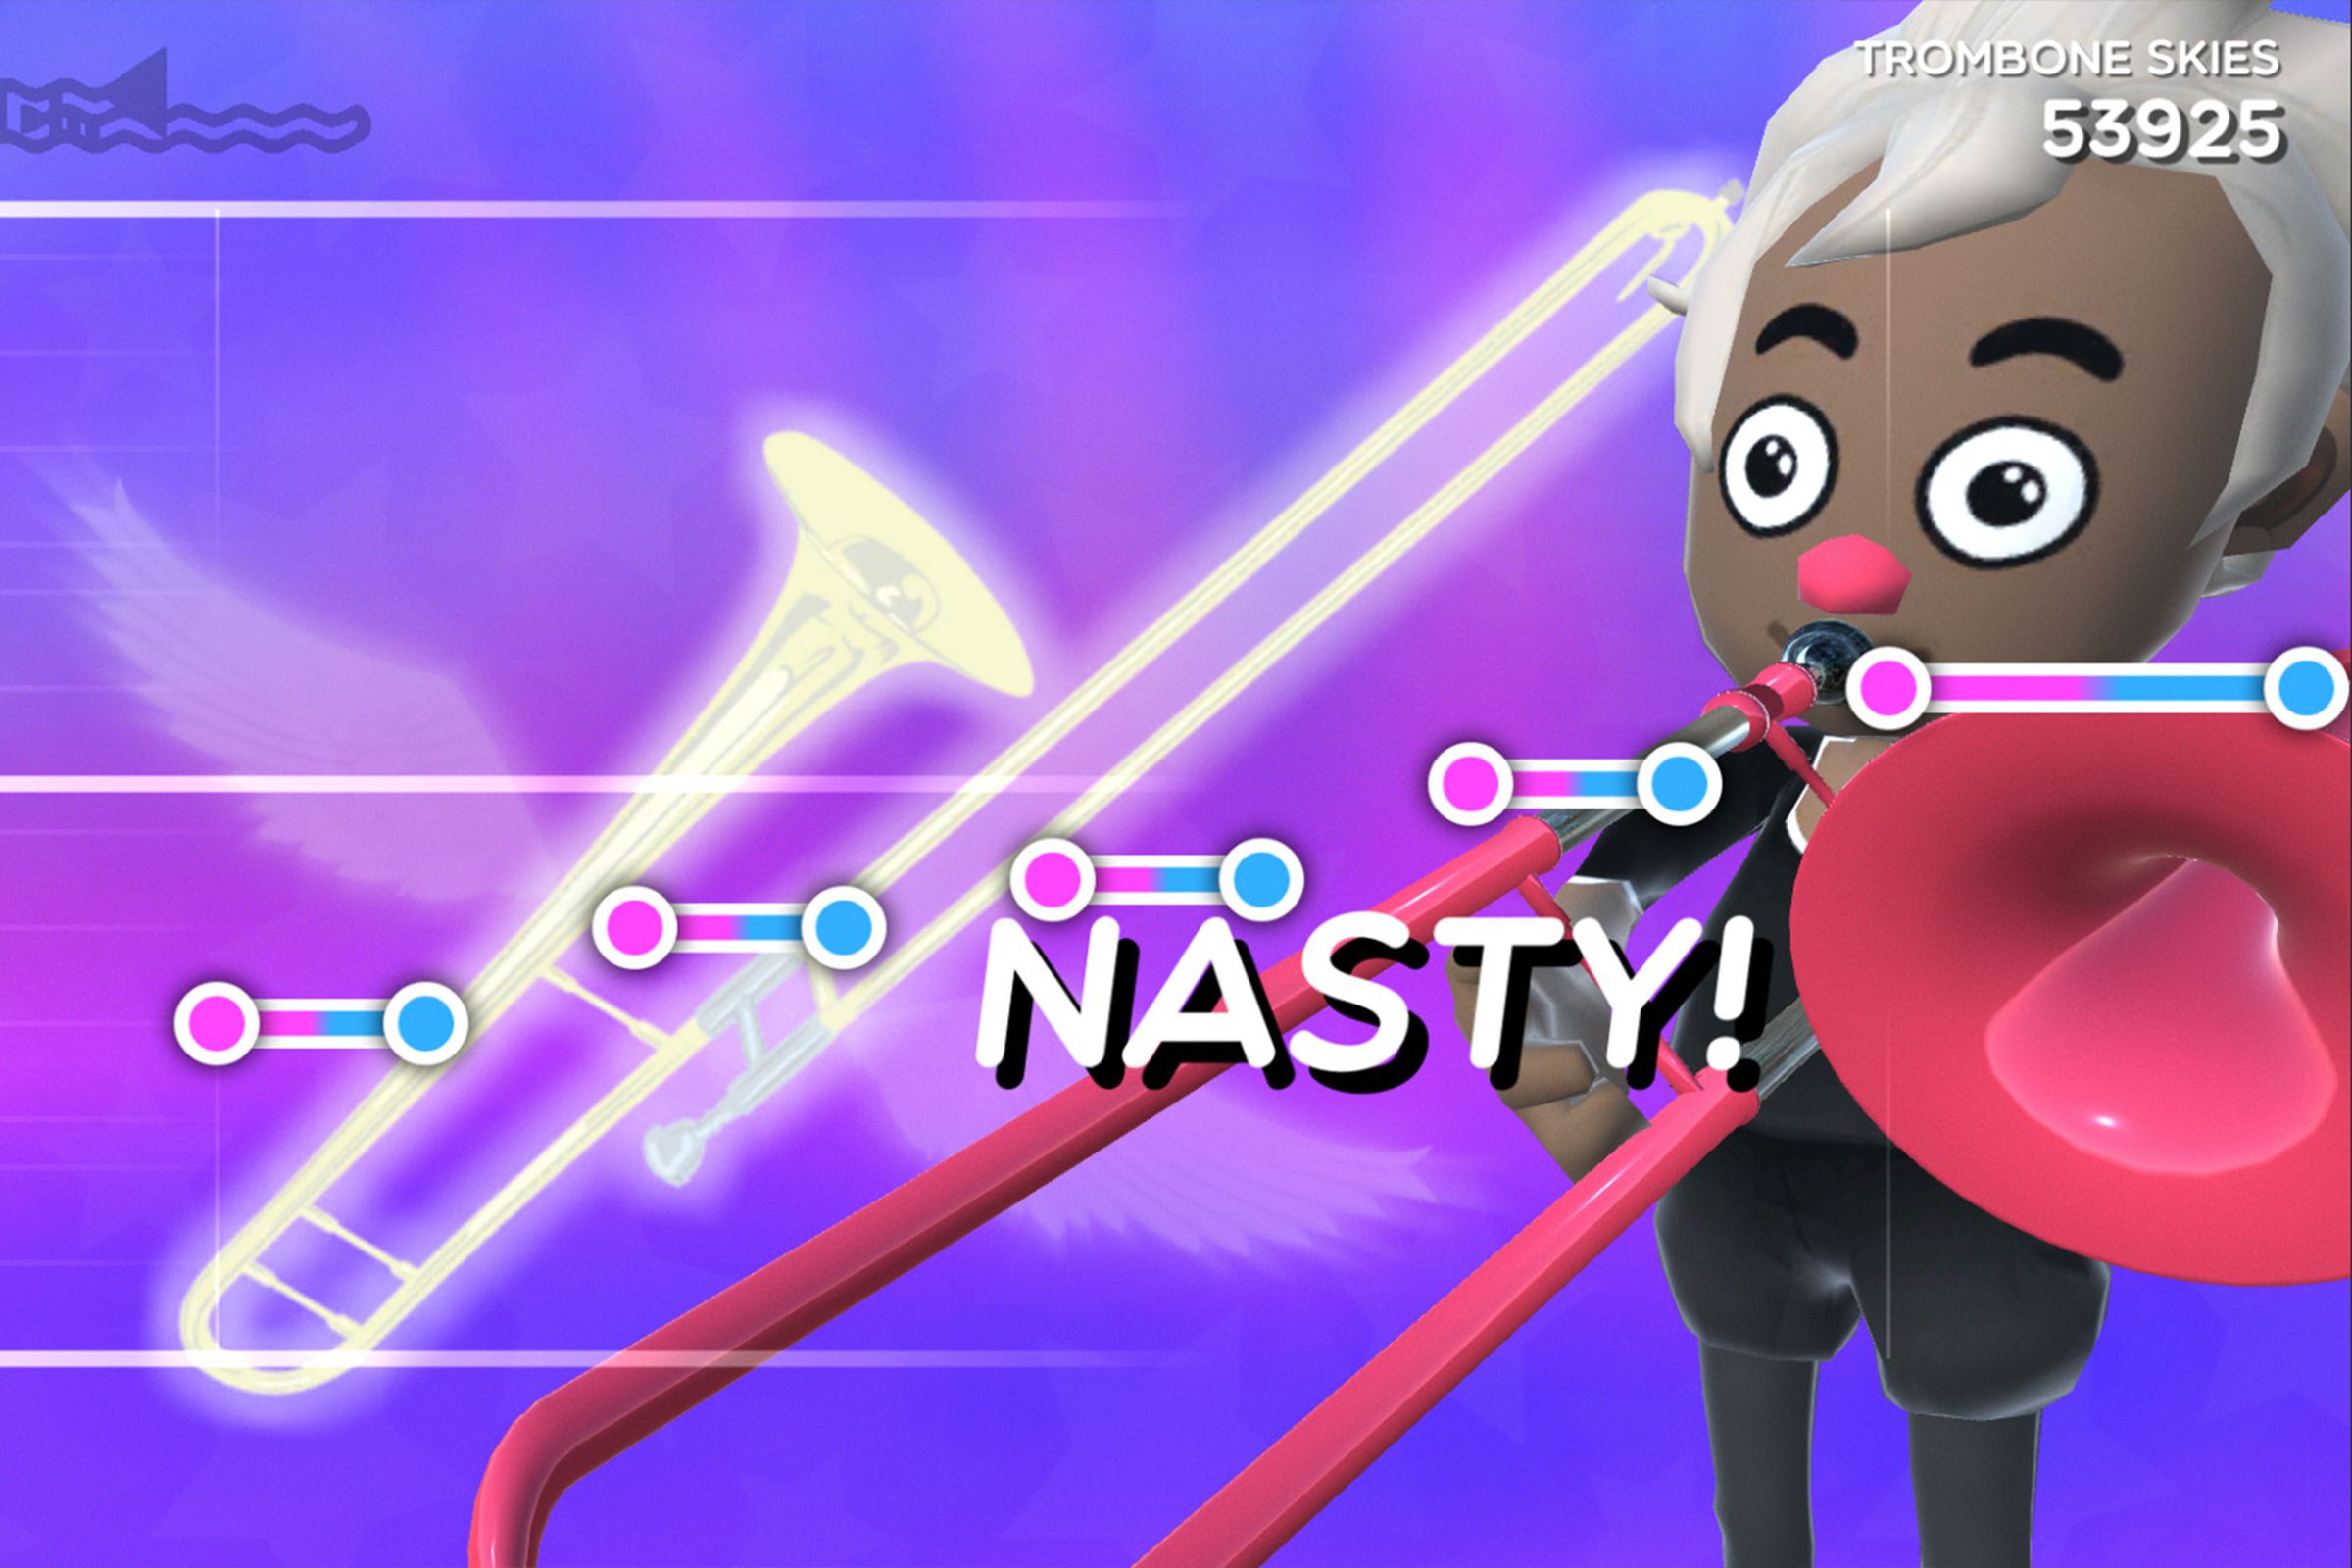 A screenshot from the game Trombone Champ. The player has missed a note, so there’s a message on the screen that reads, NASTY!